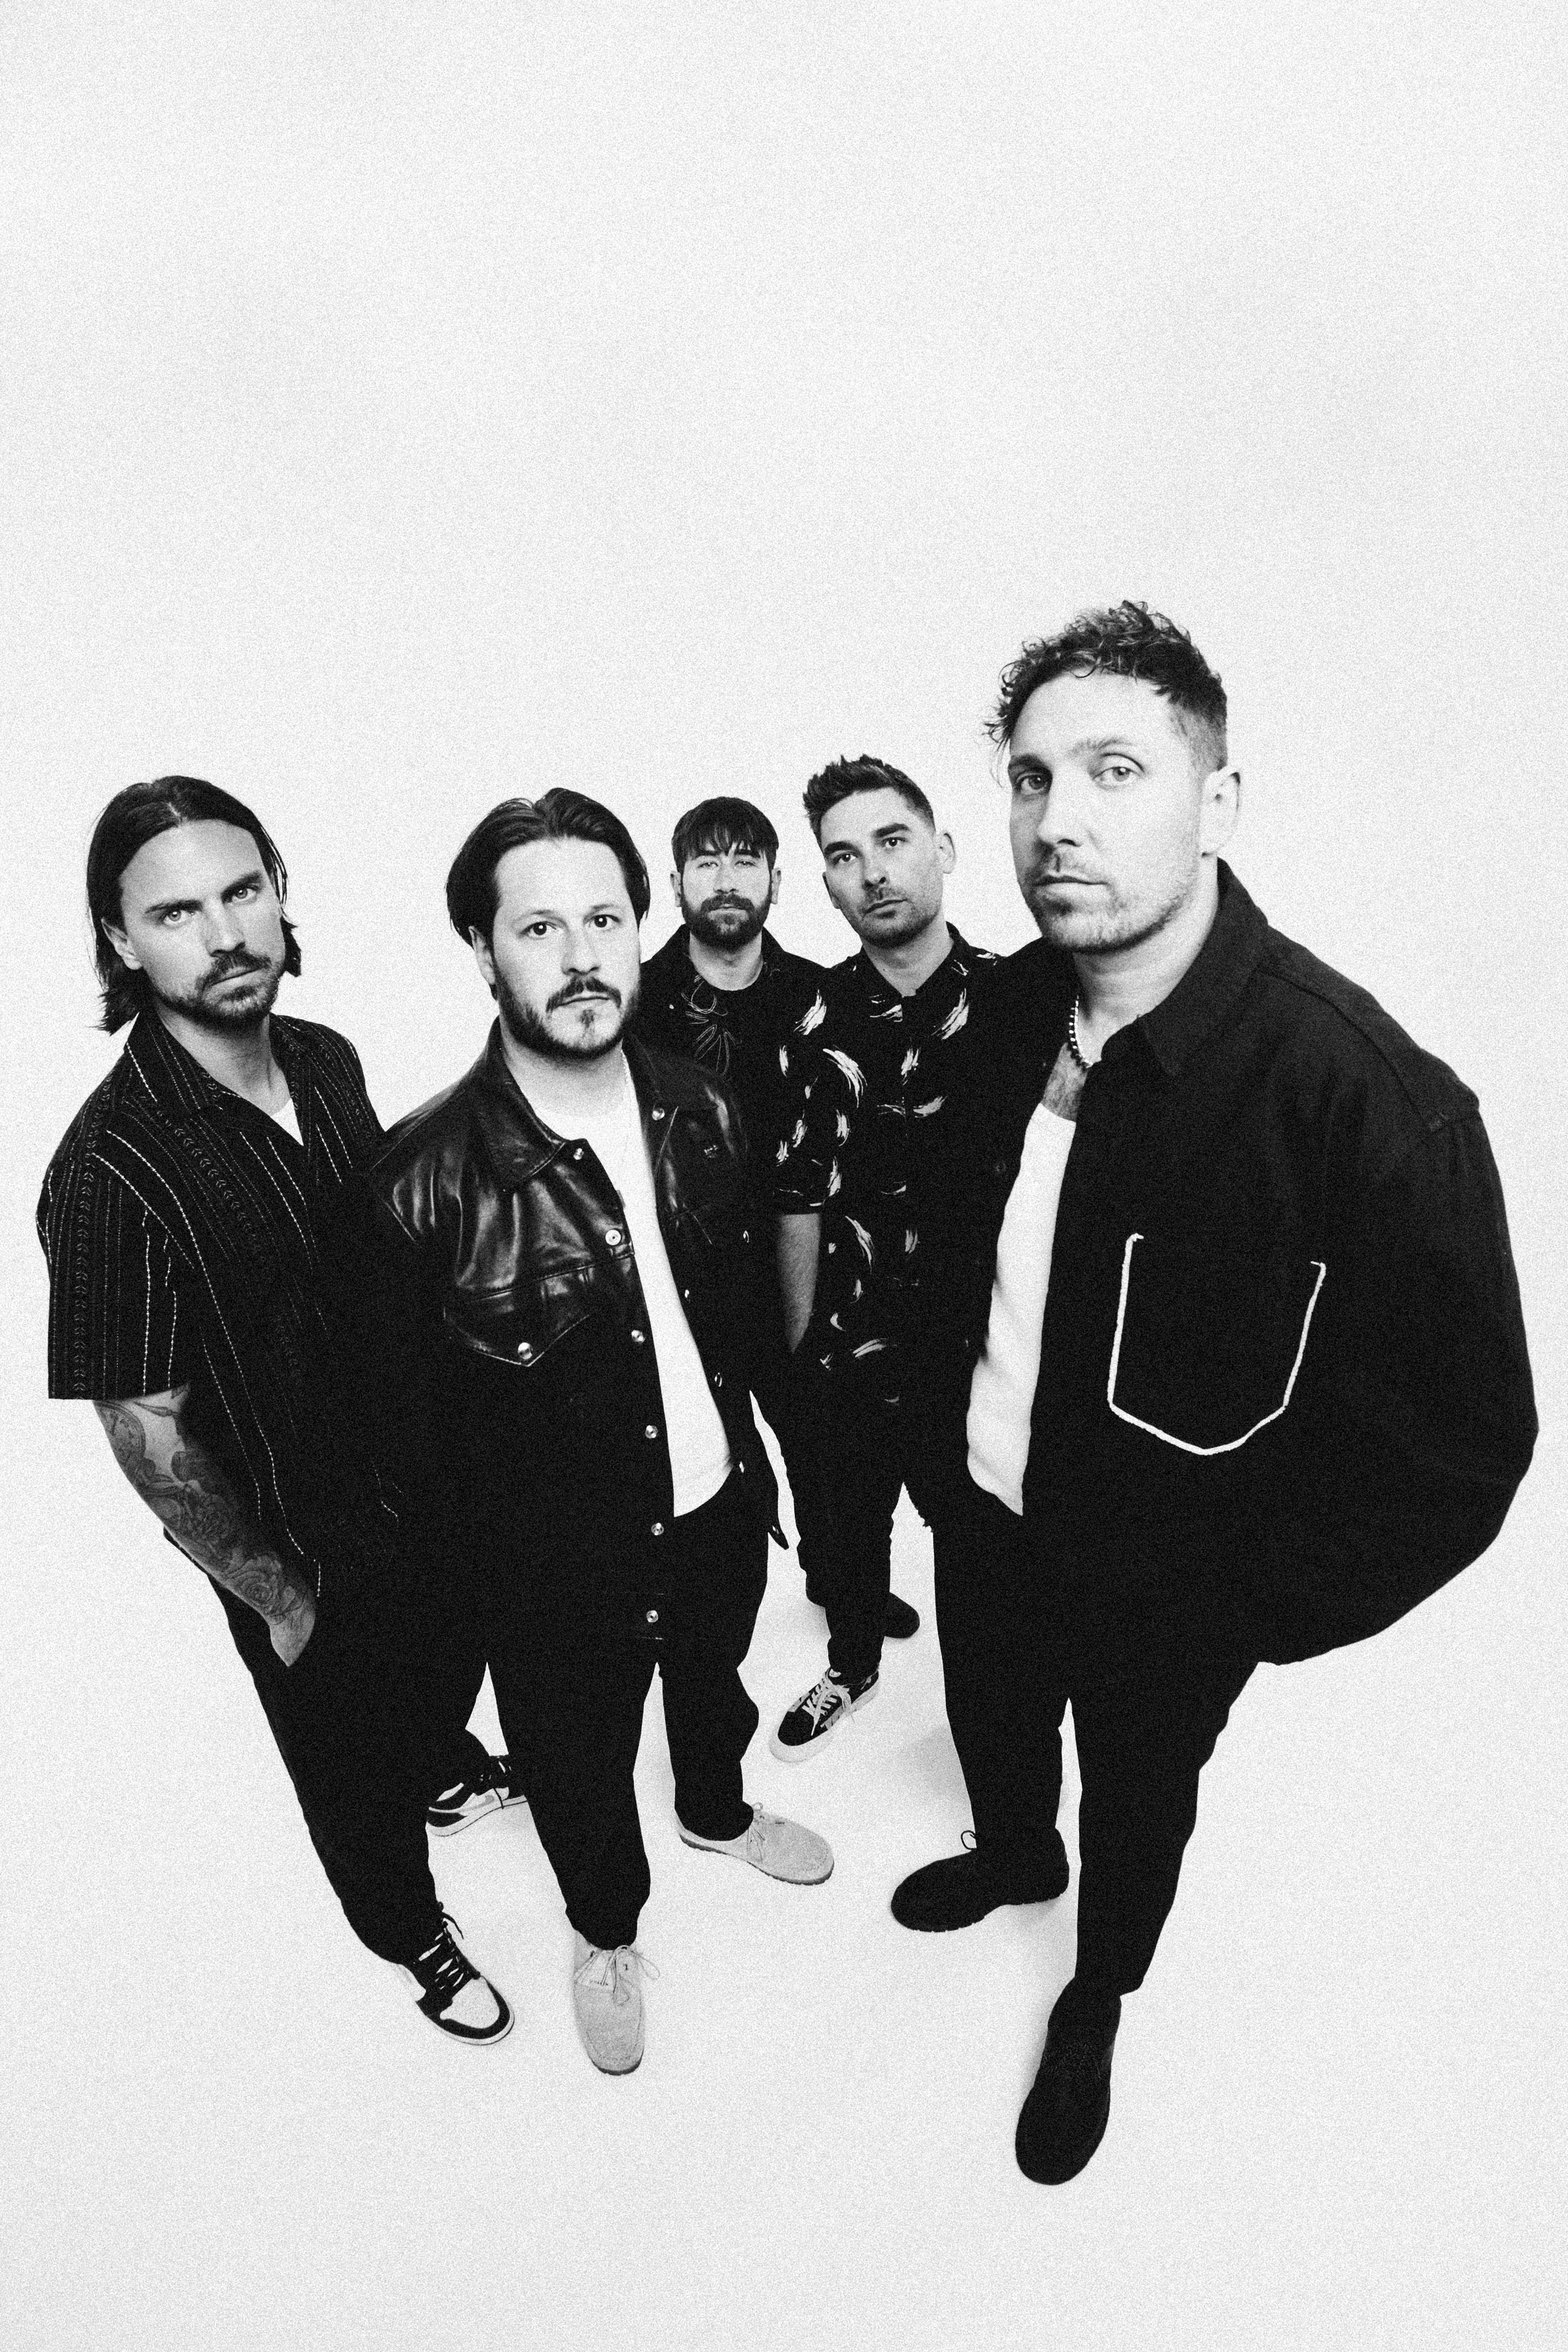 You Me At Six - the Final Nights of Six presale code